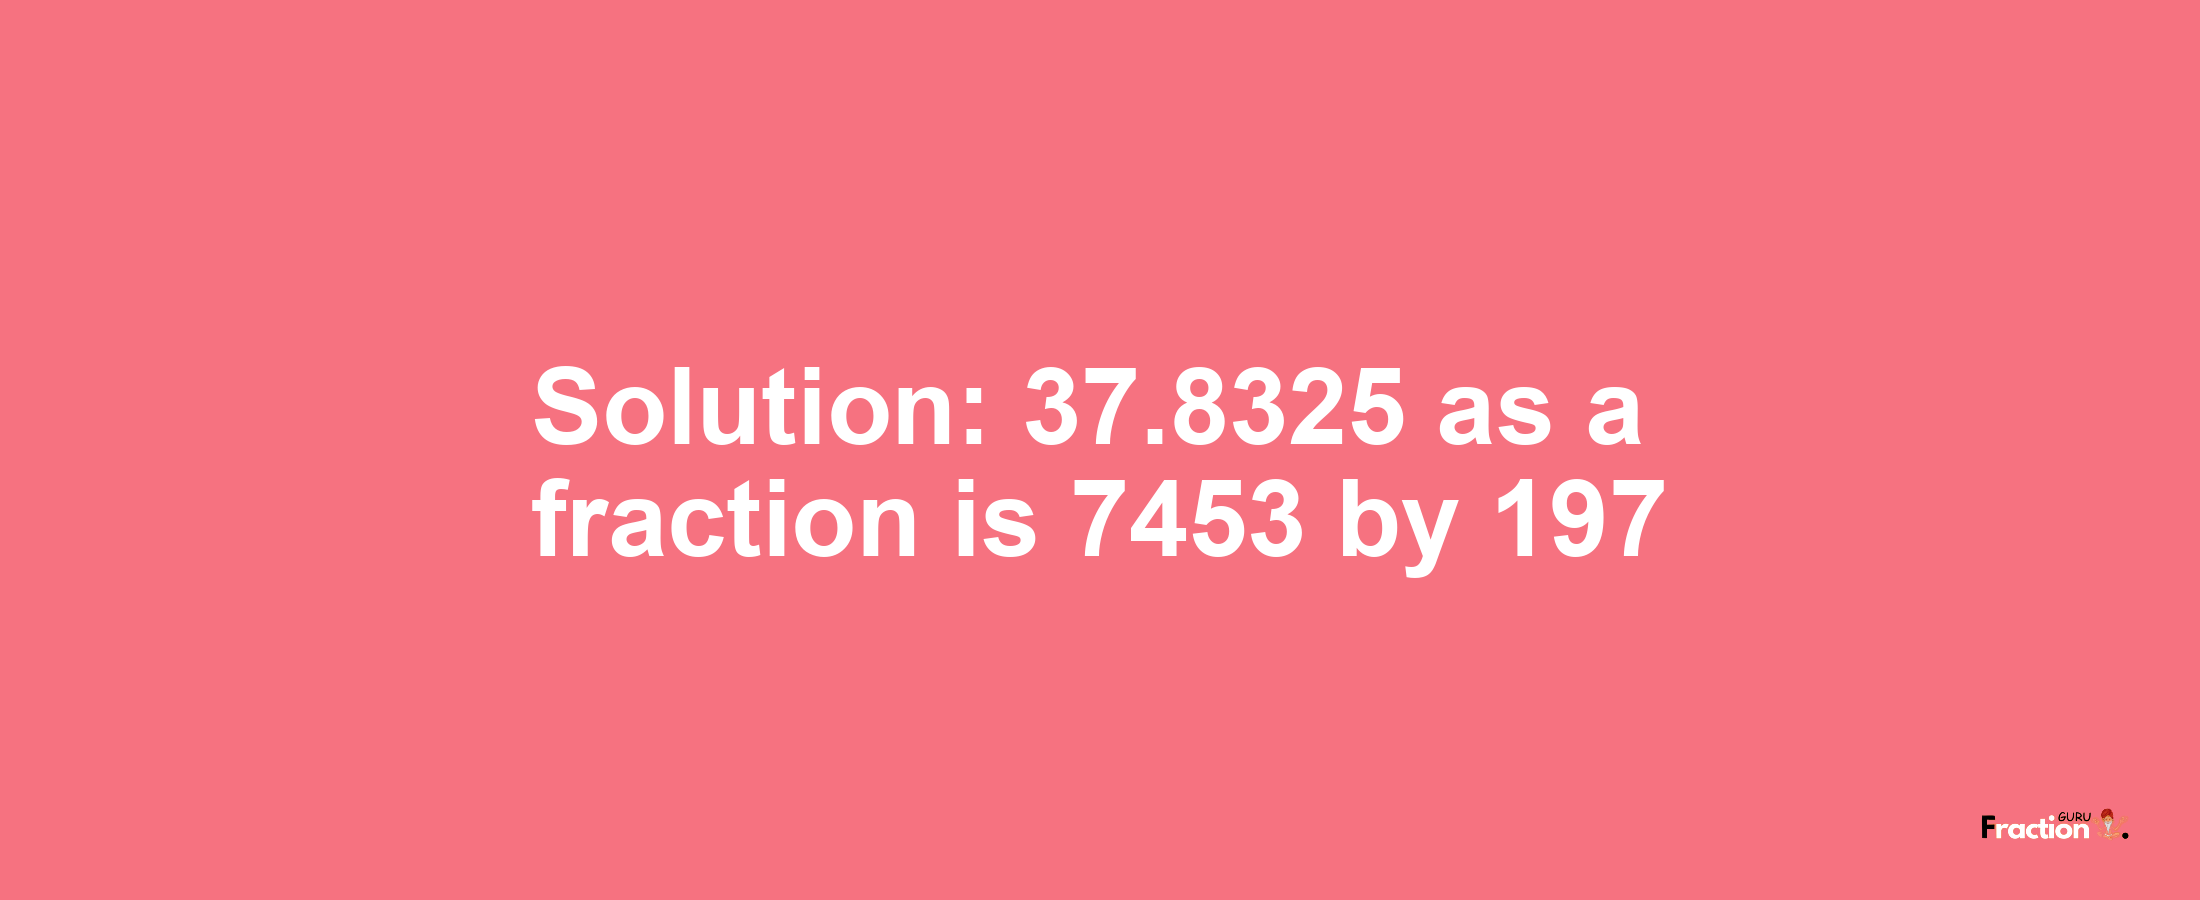 Solution:37.8325 as a fraction is 7453/197